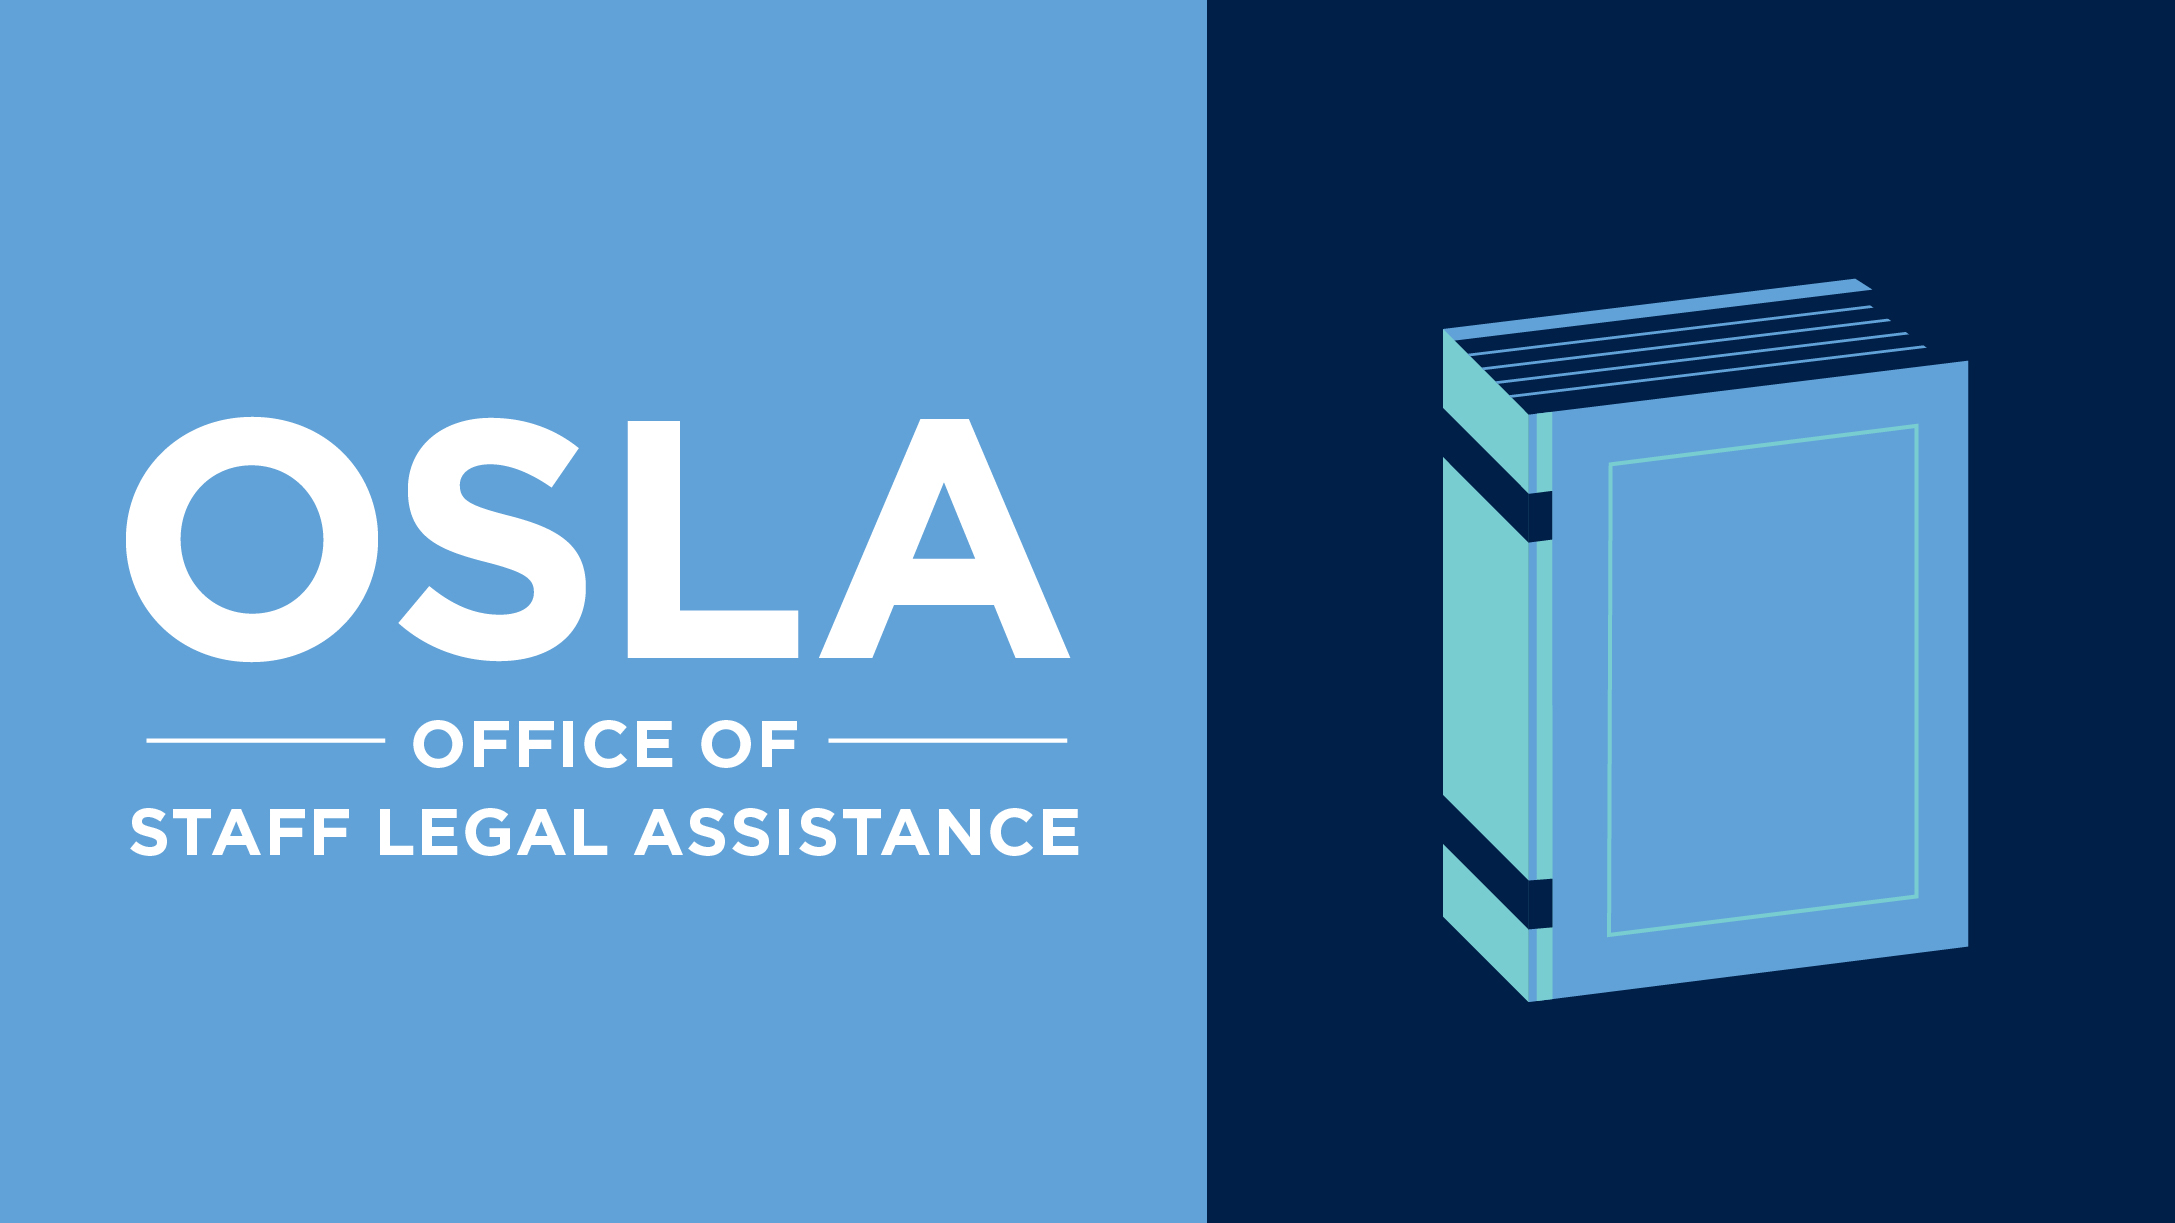 Graphic of illustration of book with text that reads OSLA - Office of Staff Legal Assistance